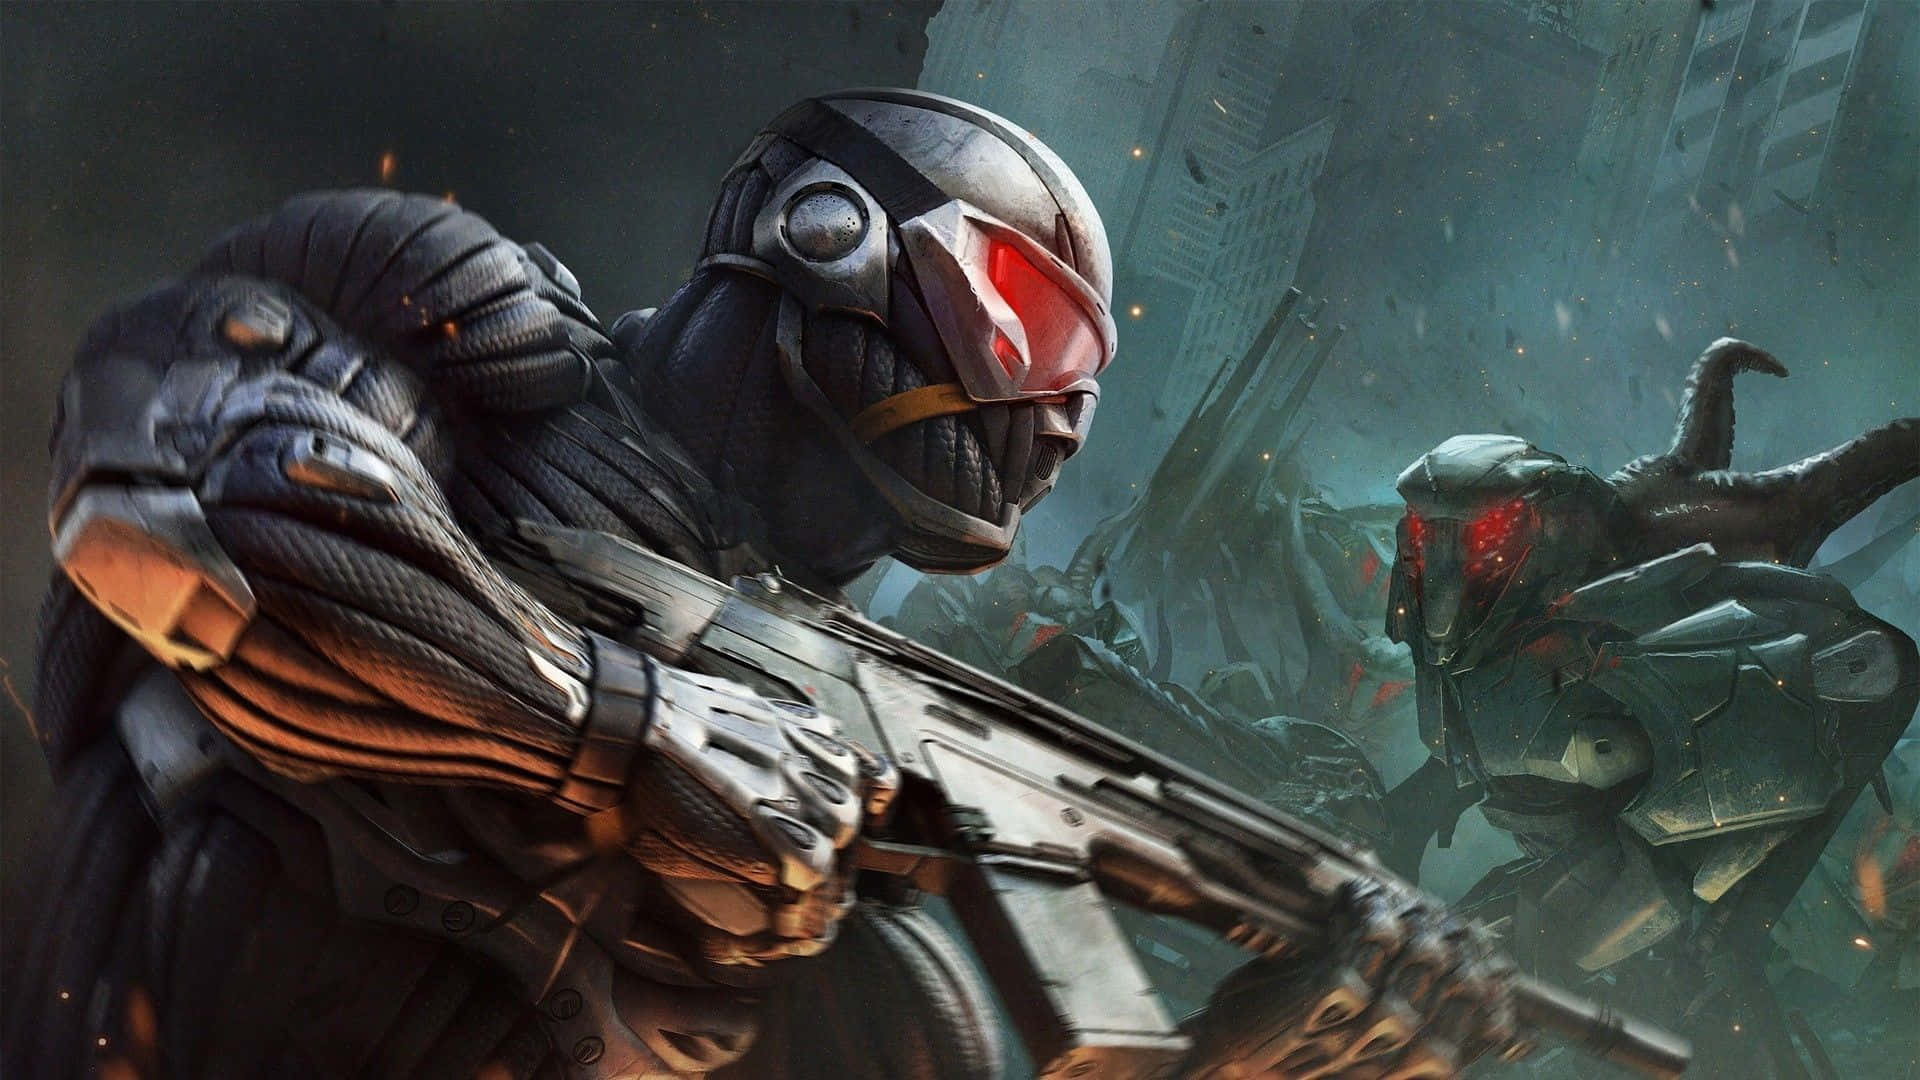 Explore the City's Alleys in Crysis 3 Wallpaper